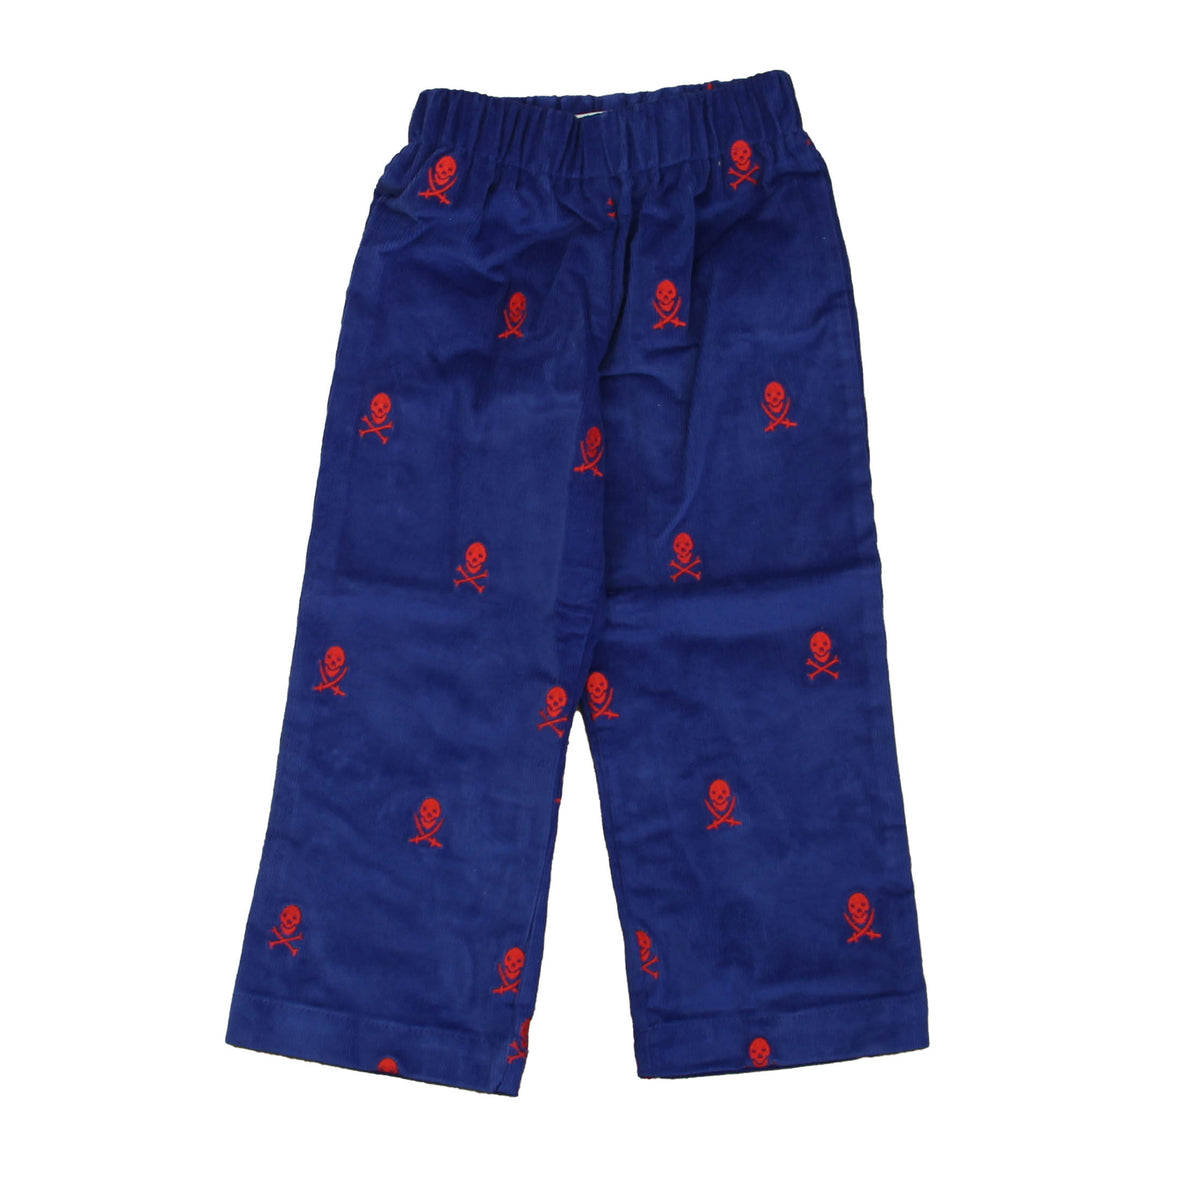 New with Tags: Navy with Skull and Cross Bones Pants -- FINAL SALE